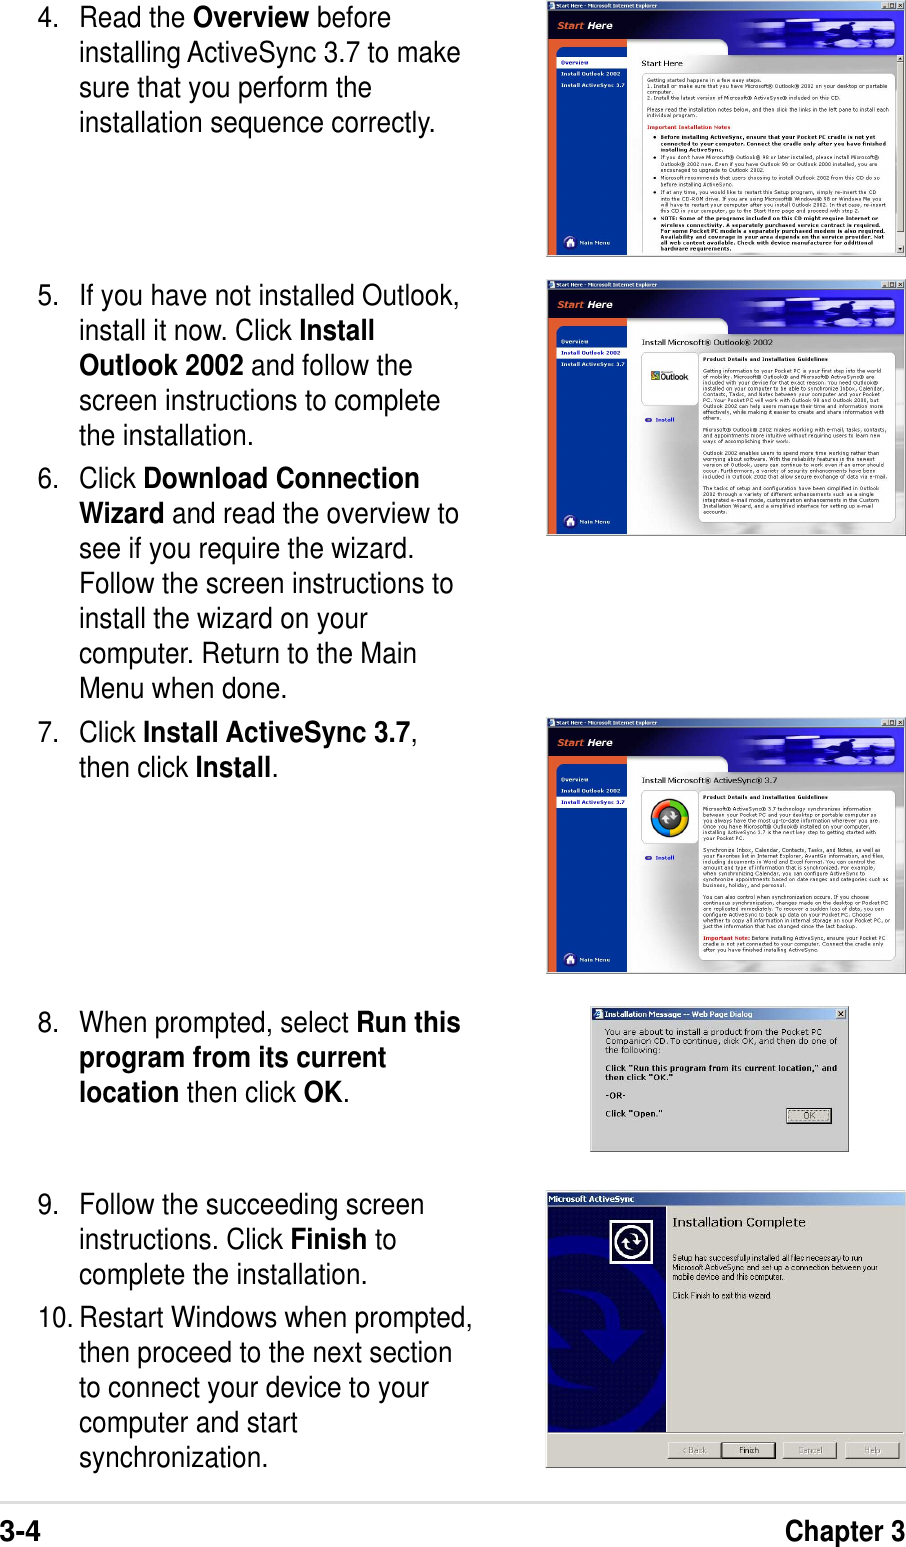 3-4Chapter 34. Read the Overview beforeinstalling ActiveSync 3.7 to makesure that you perform theinstallation sequence correctly.5. If you have not installed Outlook,install it now. Click InstallOutlook 2002 and follow thescreen instructions to completethe installation.6. Click Download ConnectionWizard and read the overview tosee if you require the wizard.Follow the screen instructions toinstall the wizard on yourcomputer. Return to the MainMenu when done.7. Click Install ActiveSync 3.7,then click Install.8. When prompted, select Run thisprogram from its currentlocation then click OK.9. Follow the succeeding screeninstructions. Click Finish tocomplete the installation.10. Restart Windows when prompted,then proceed to the next sectionto connect your device to yourcomputer and startsynchronization.